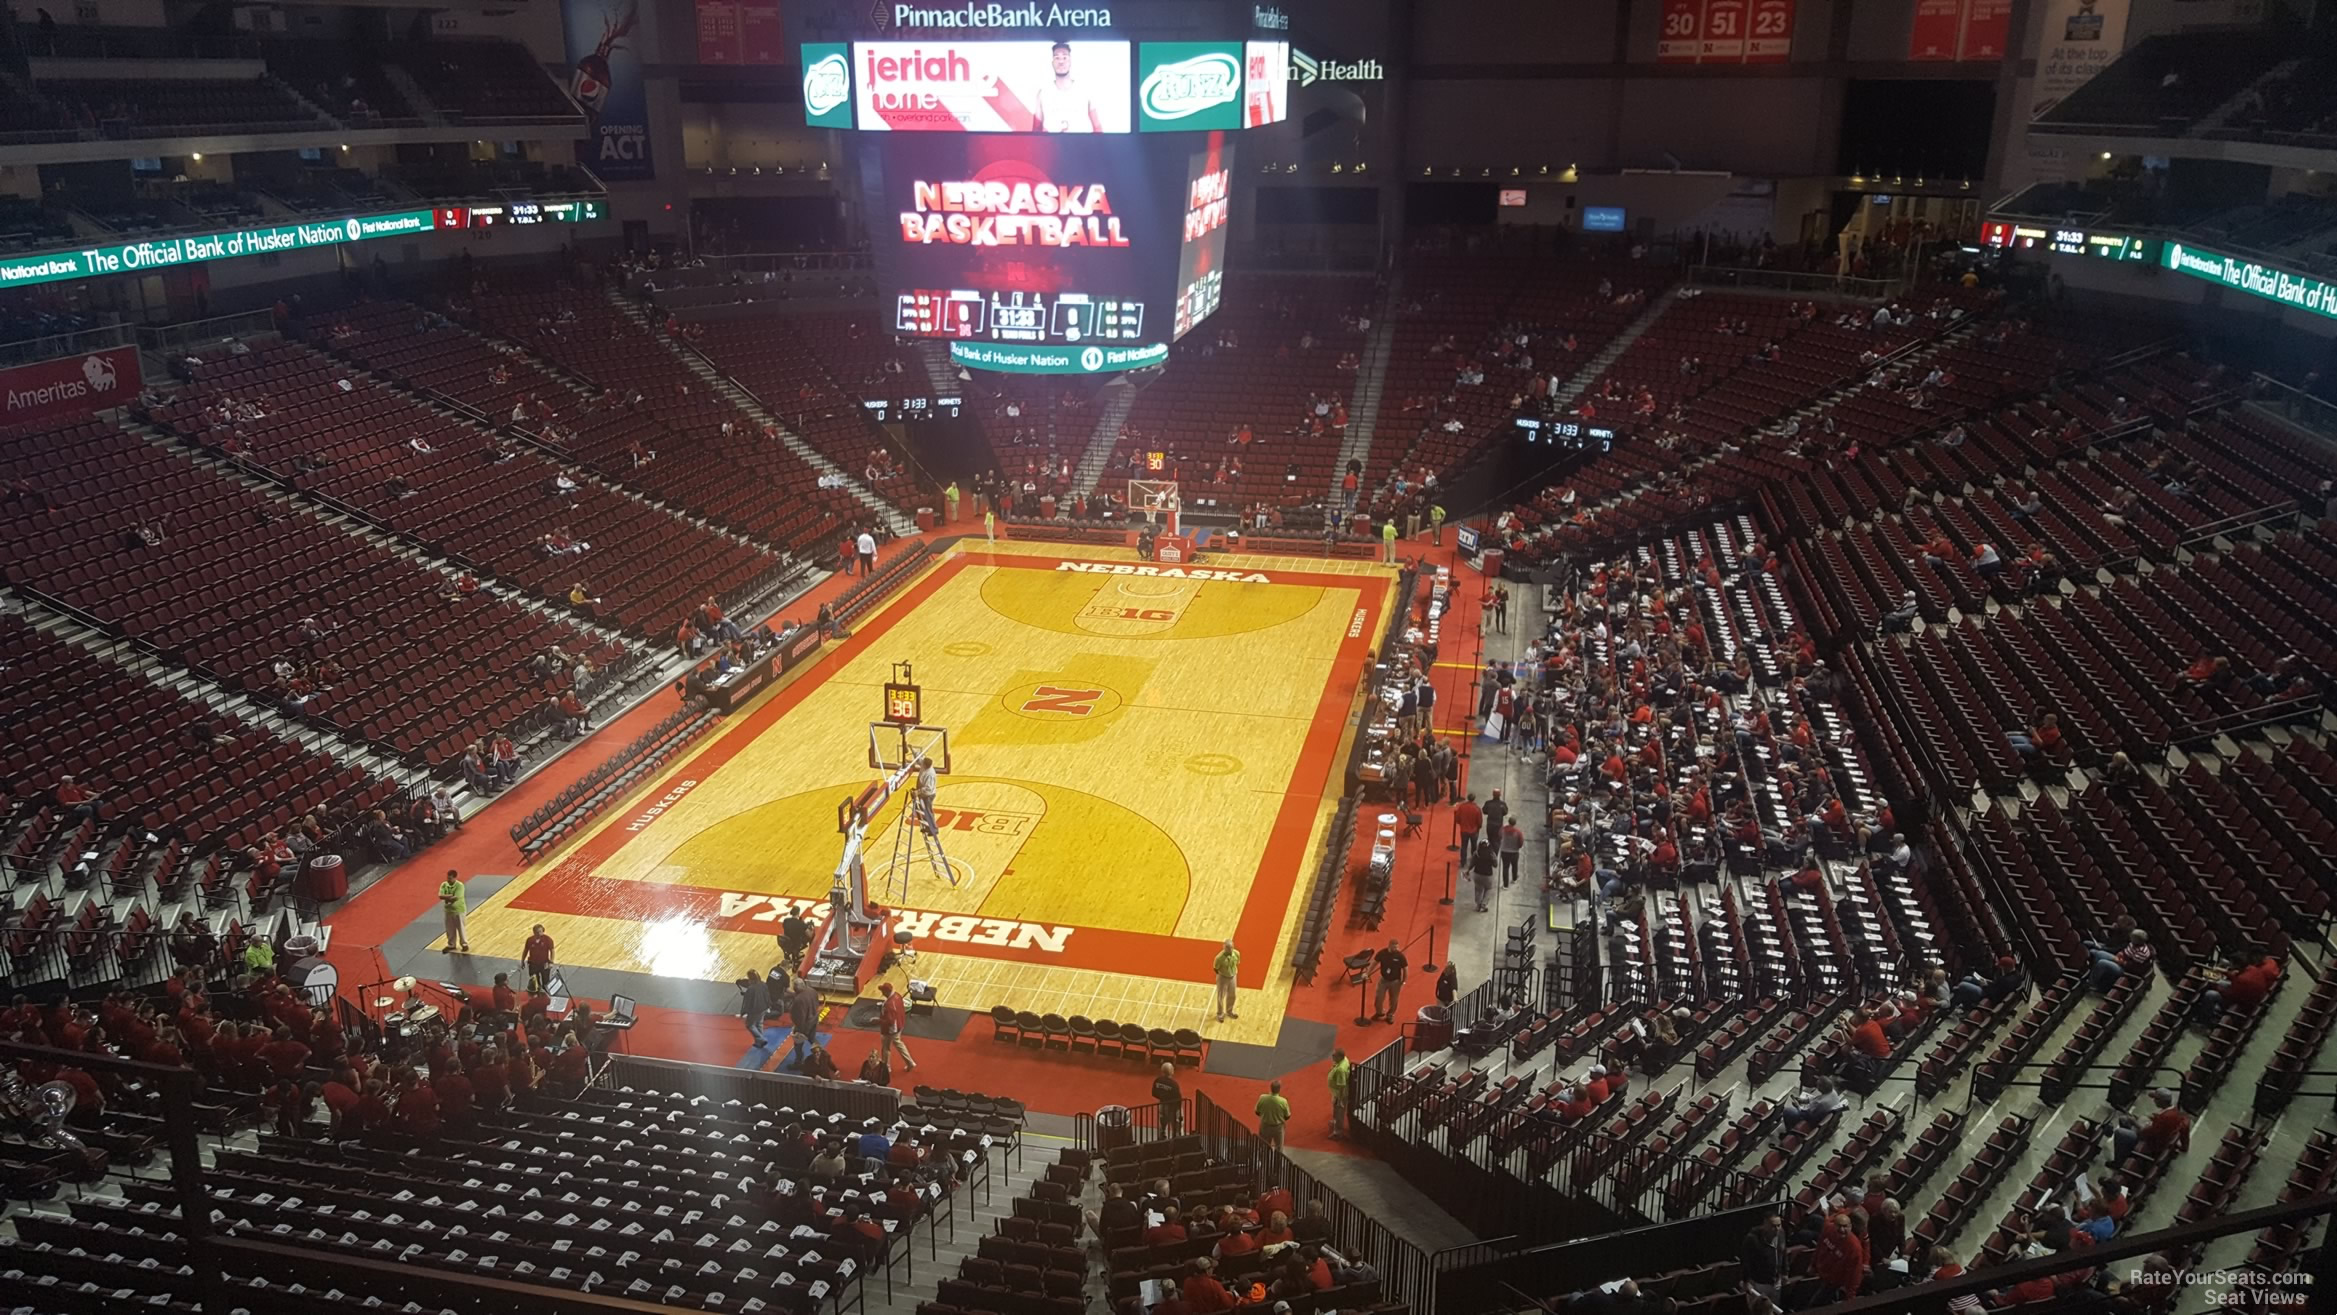 section 210, row 3 seat view  for basketball - pinnacle bank arena